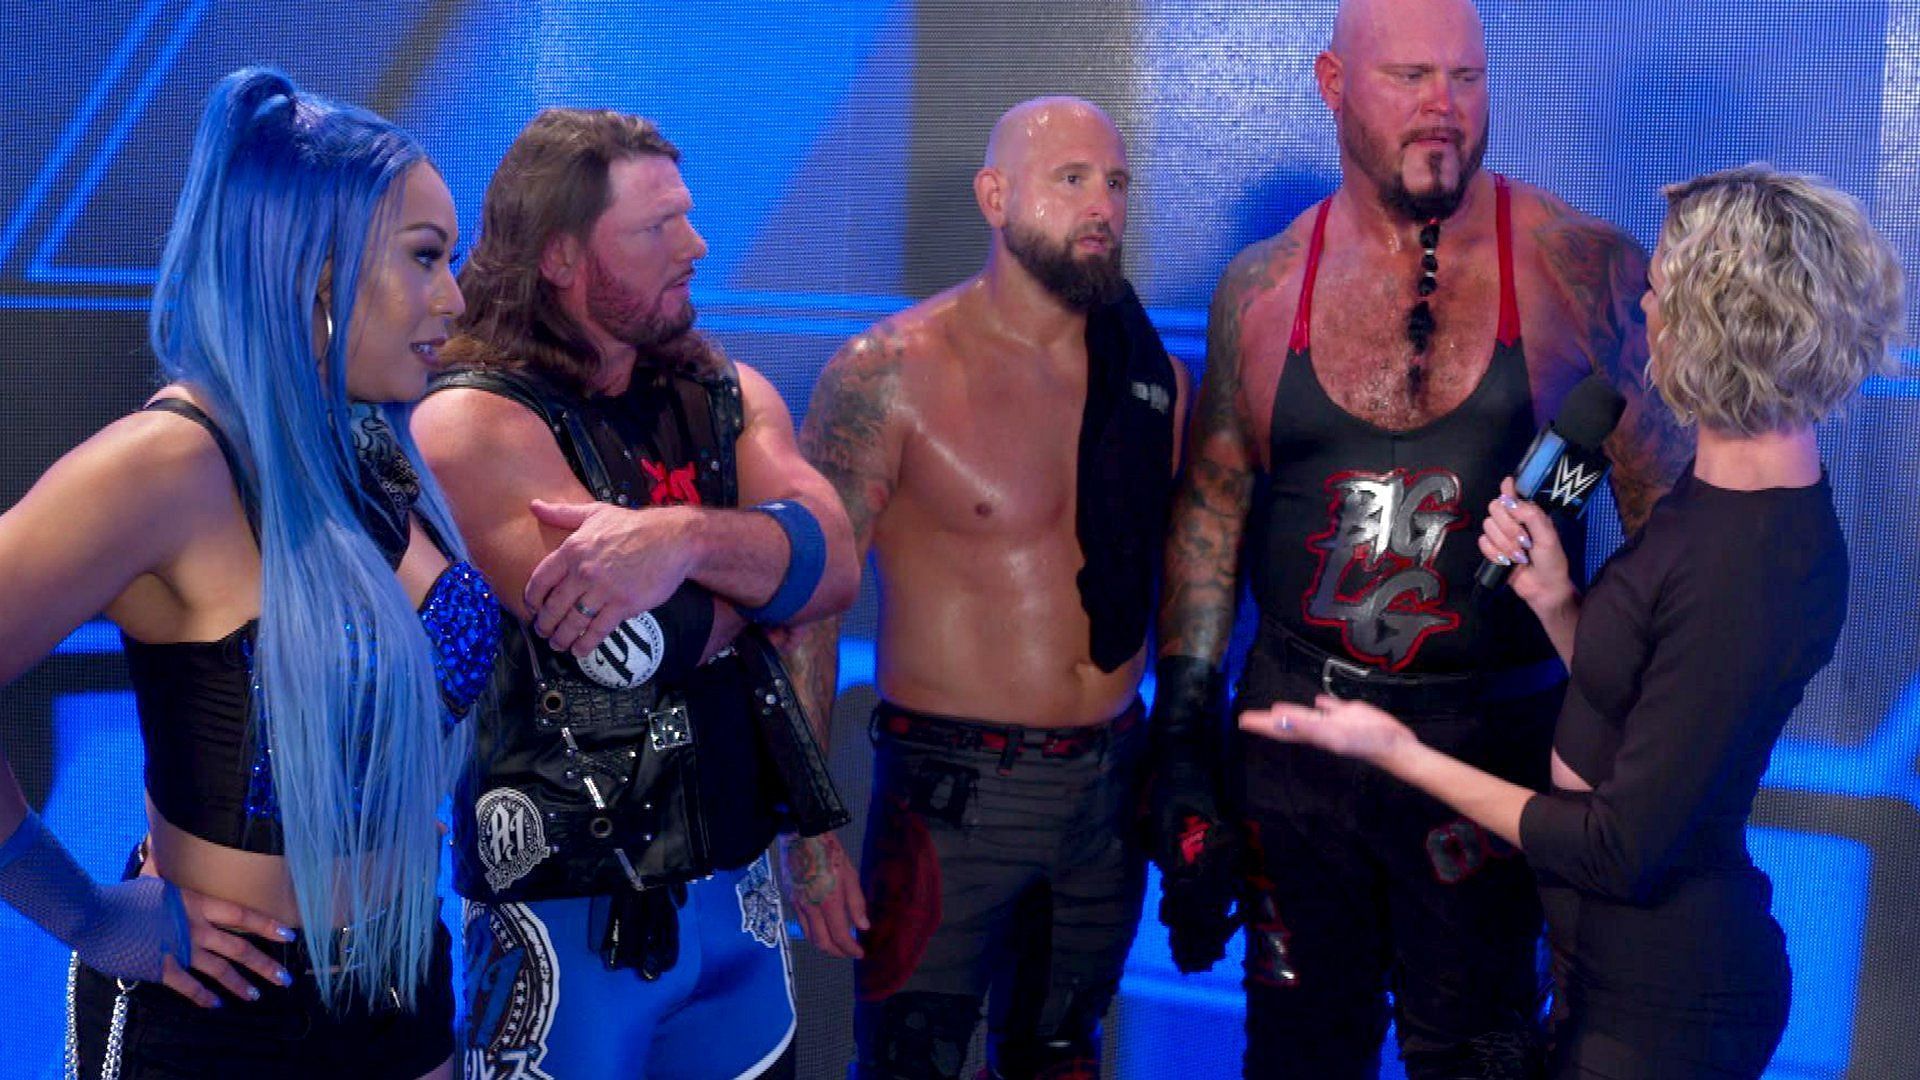 The O.C. on SmackDown.